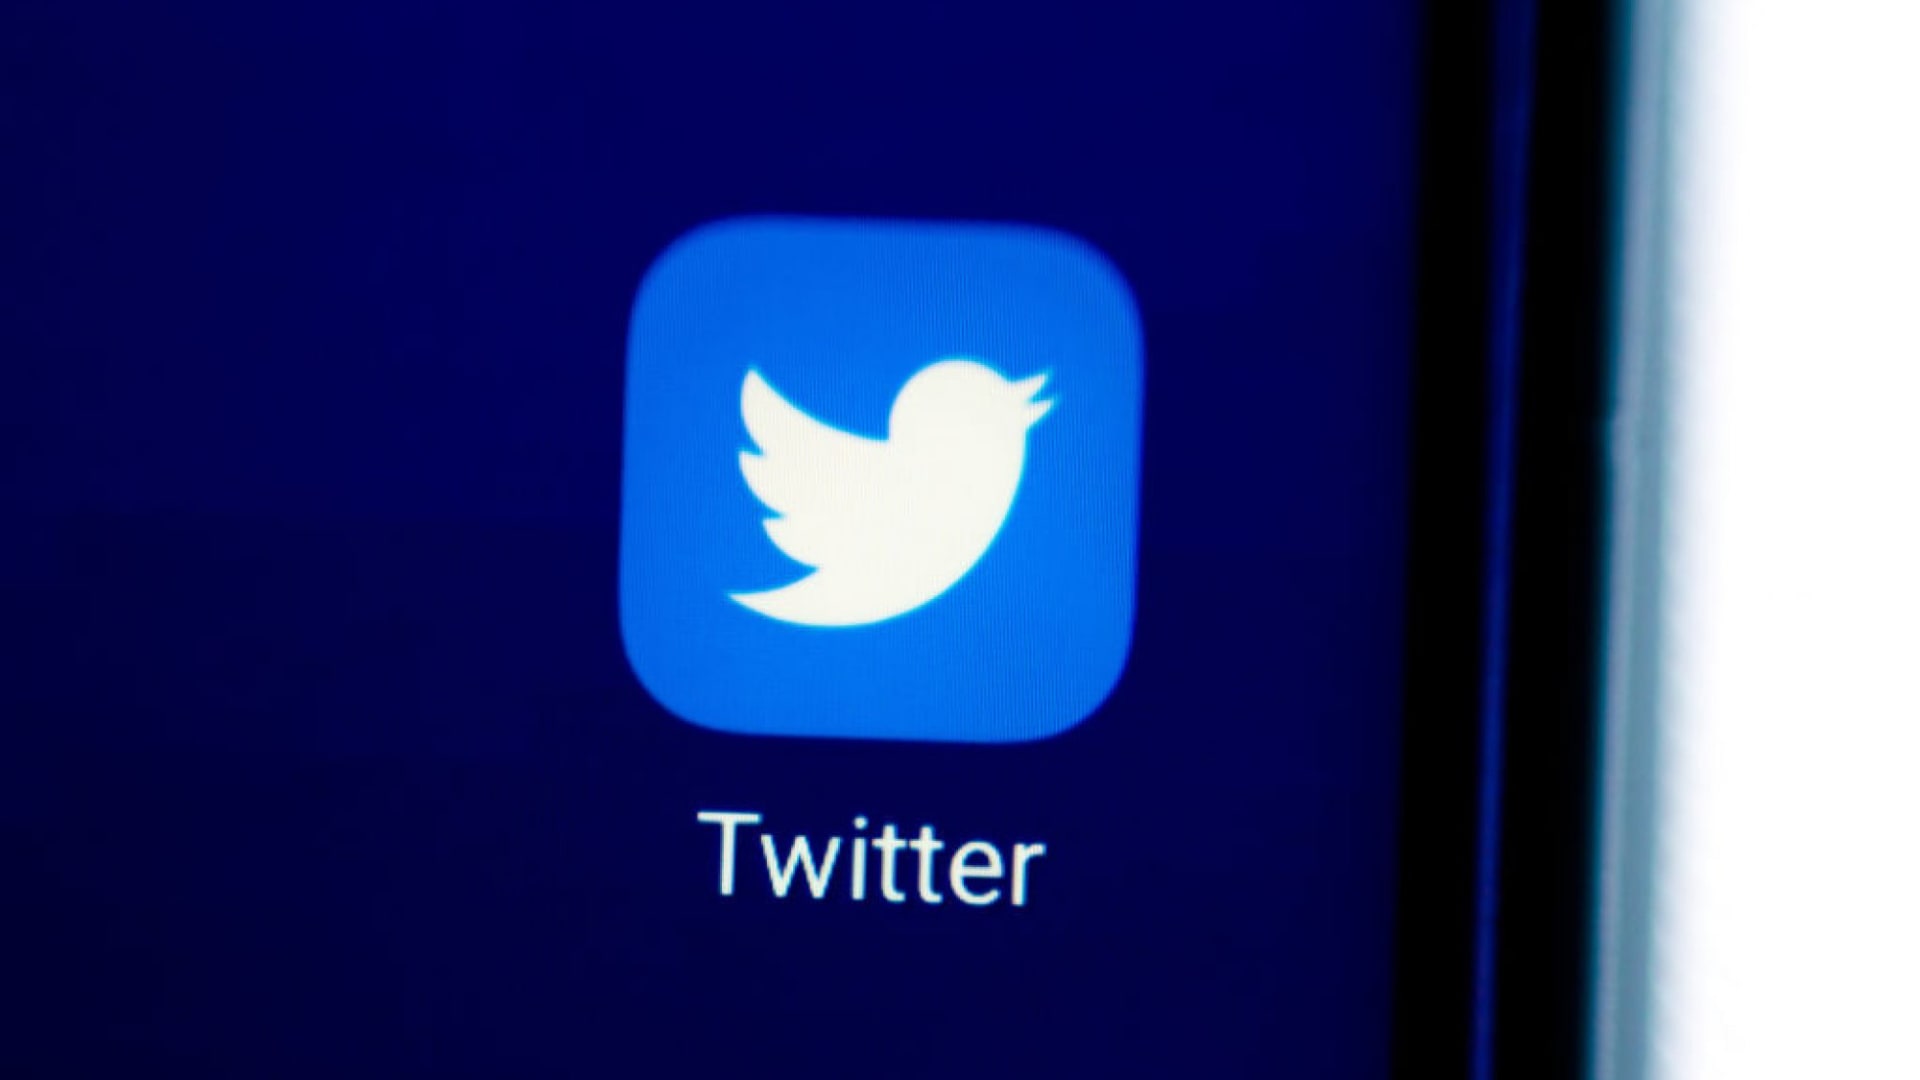 After 16 Years, Twitter Is Finally Adding Its Most-Requested Feature. This Is Not Going to End Well